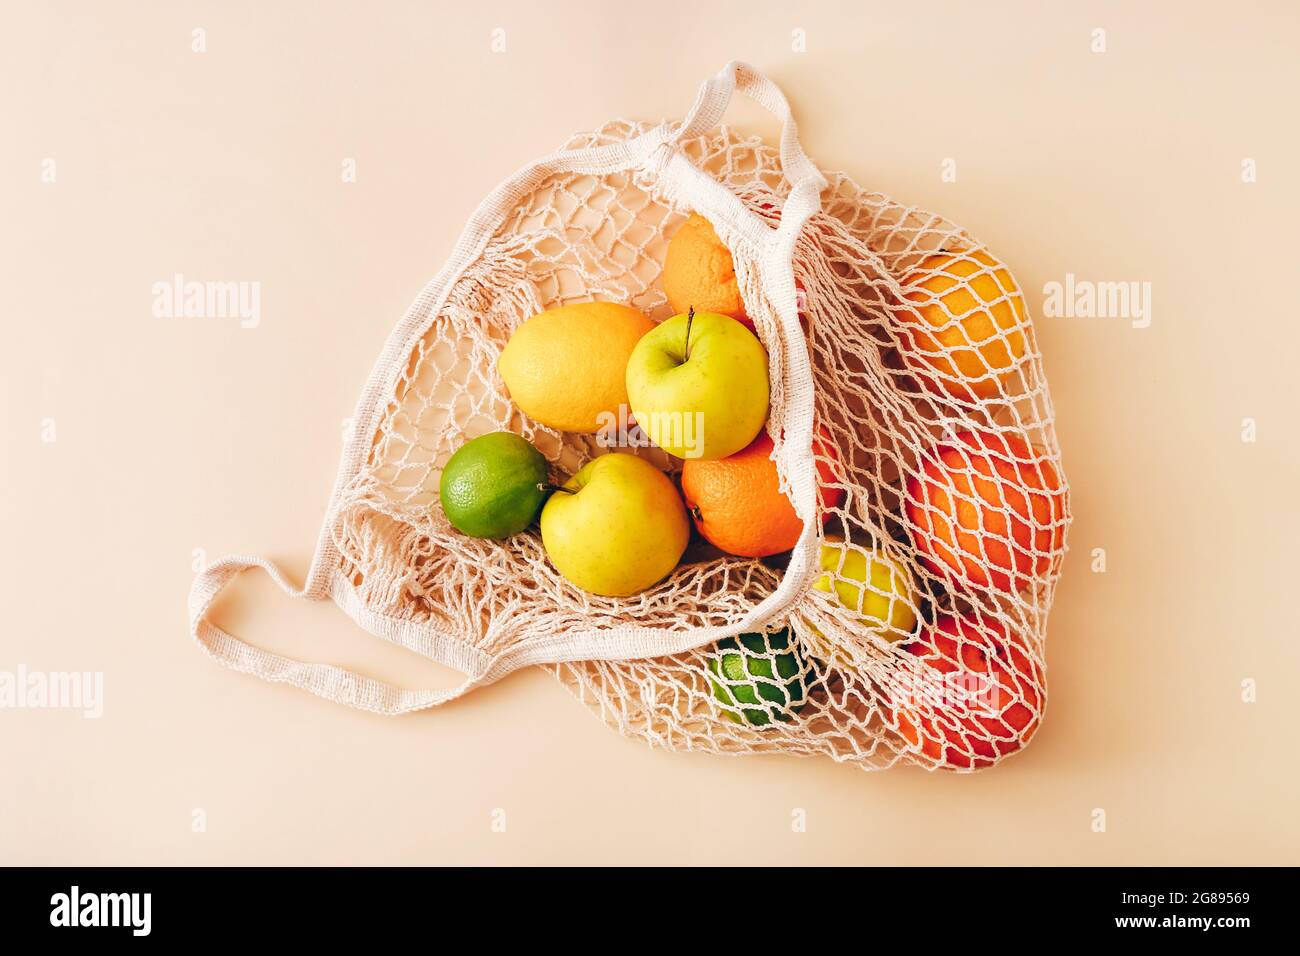 Mesh shopping bag with fresh fruits on light colored background. Zero waste, plastic free concept. Stock Photo